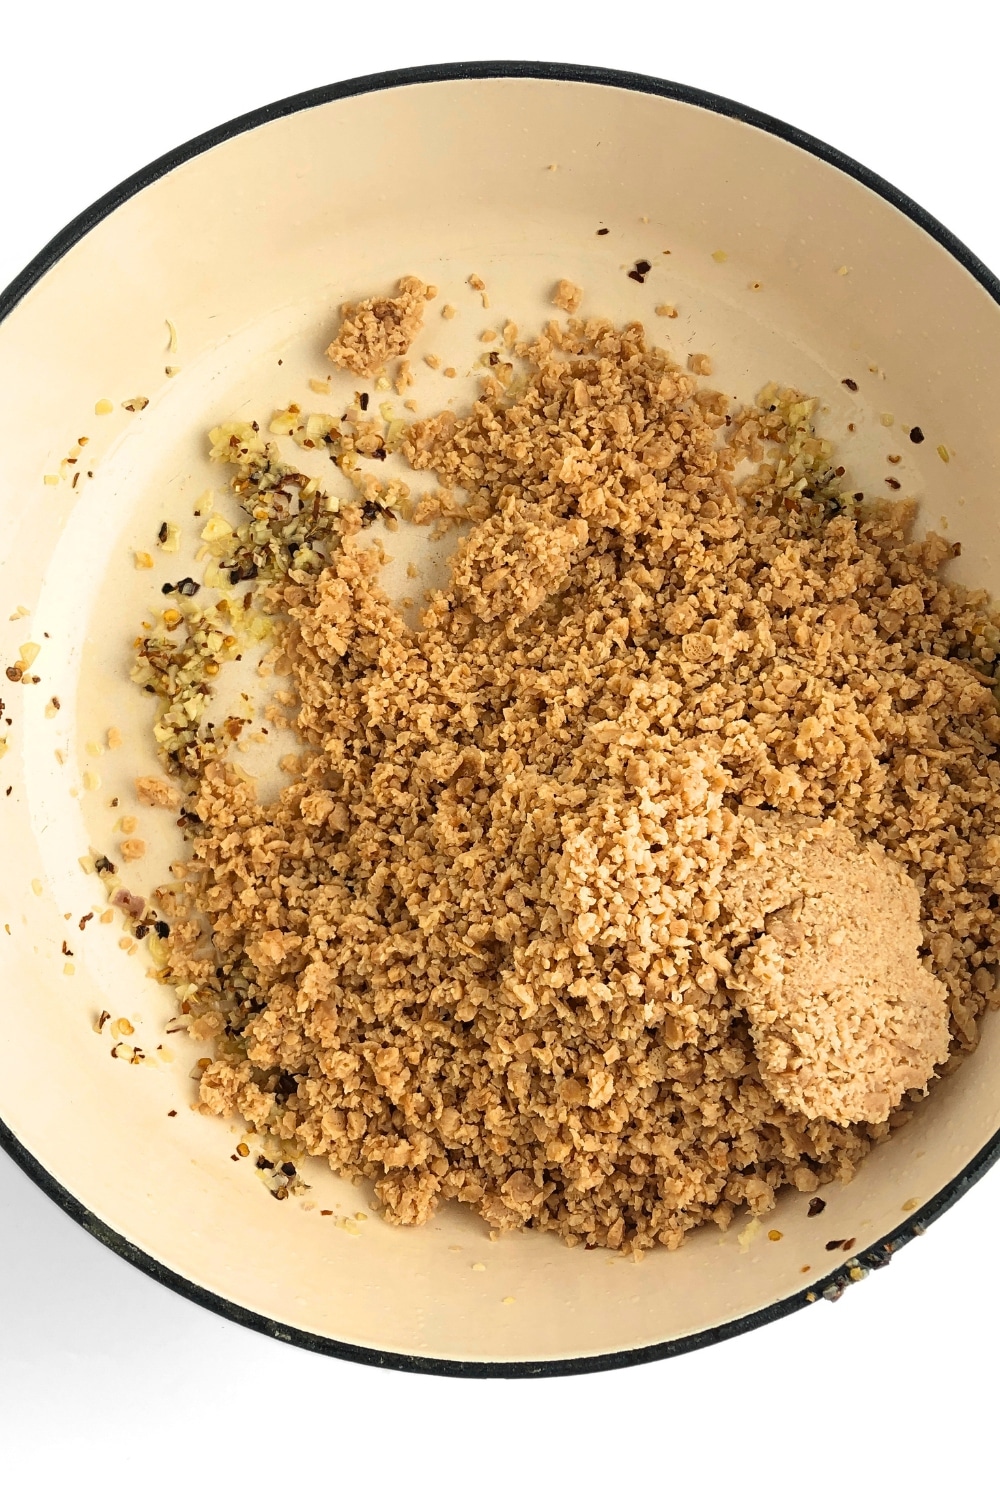 Top-down view of fried spices and TVP added to frying pan.